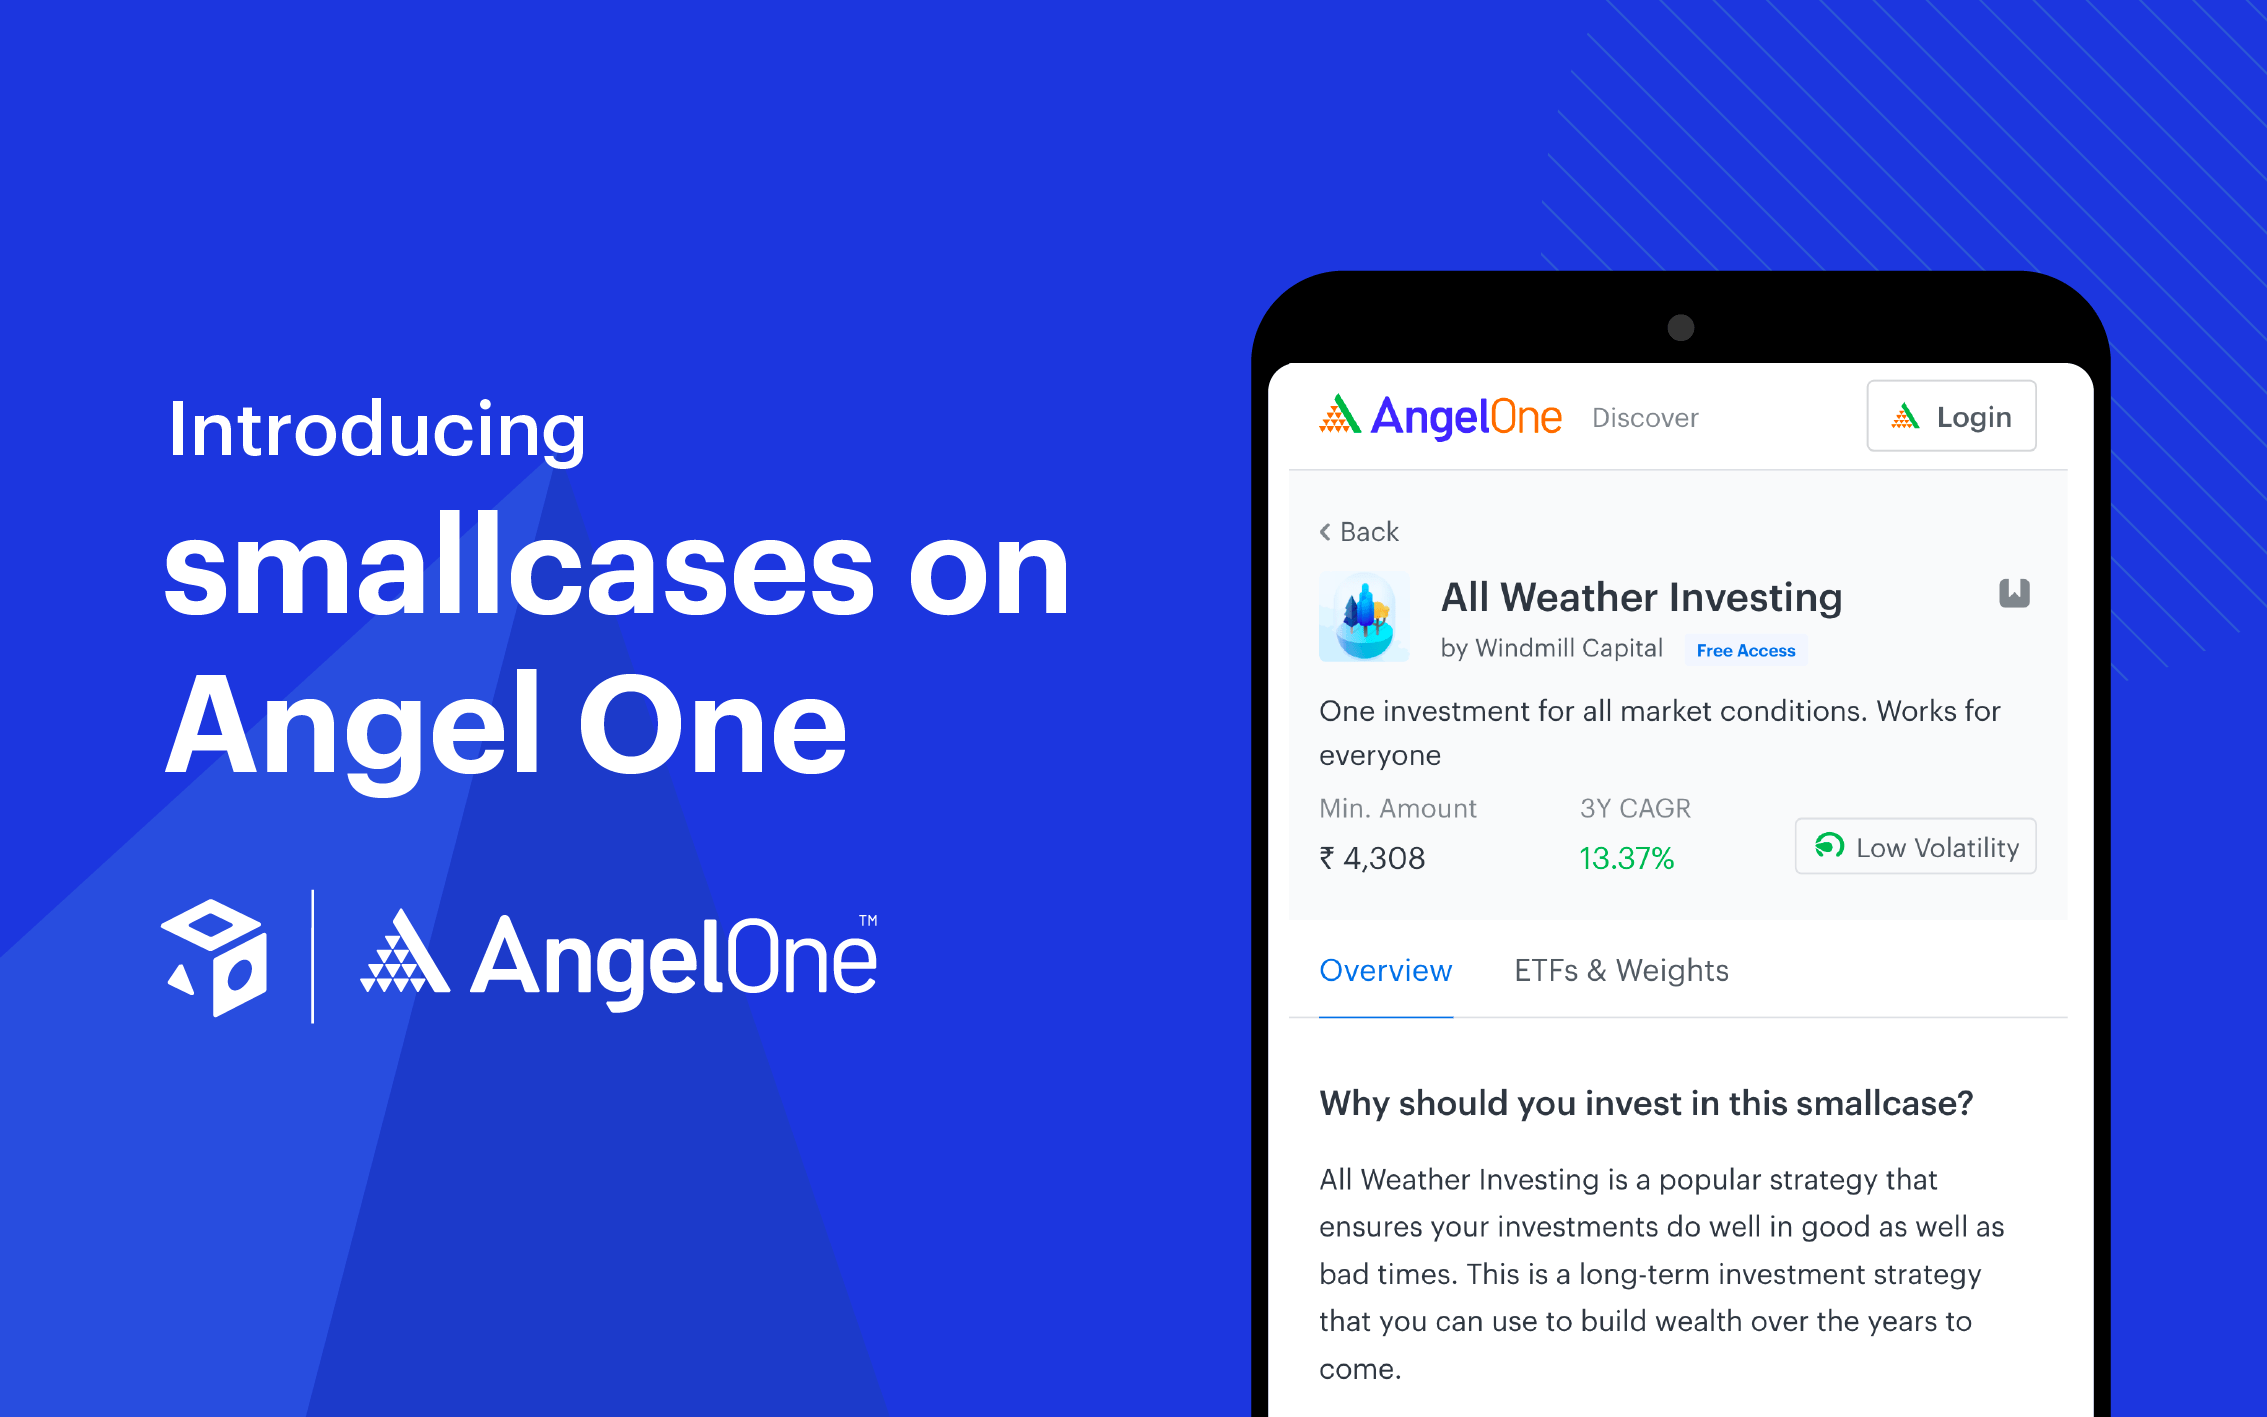 Introducing smallcases on Angel One